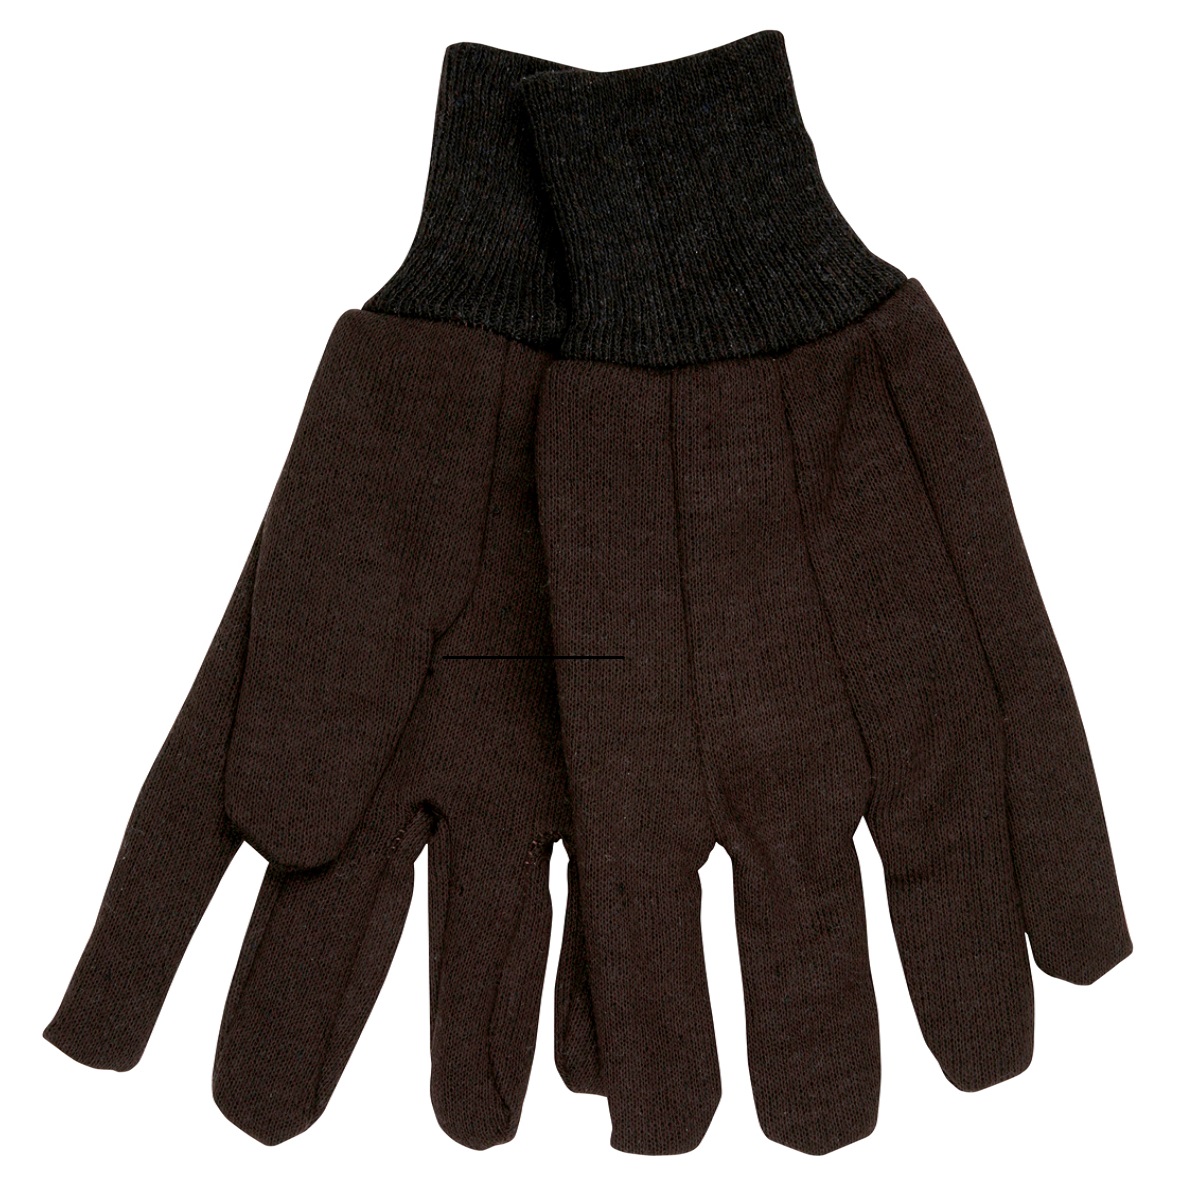 Airgas - MEG9637XSM - Memphis Glove Gray X-Small 7 Gauge Cotton And  Polyester String Knit Work Gloves With Knit Wrist